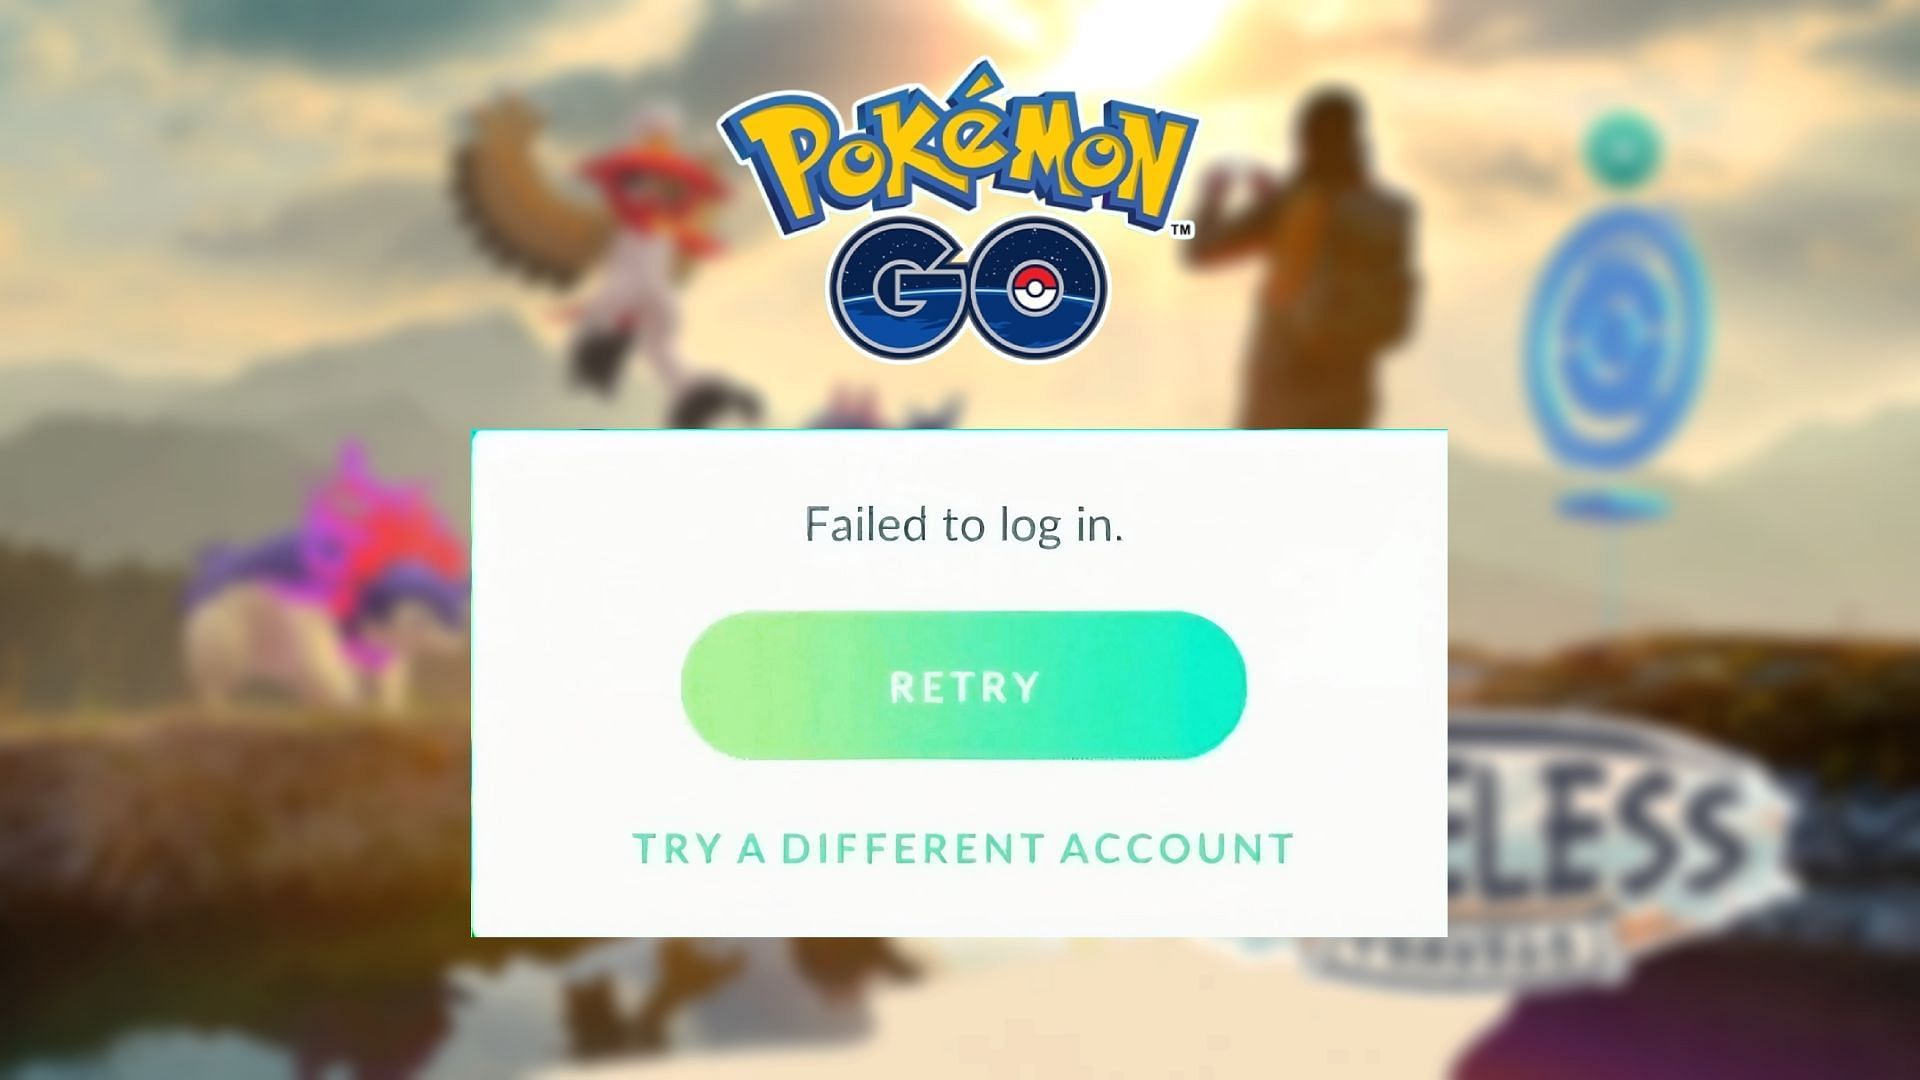 Pokemon Go "Failed to Sign in" error Possible reasons, how to fix, and